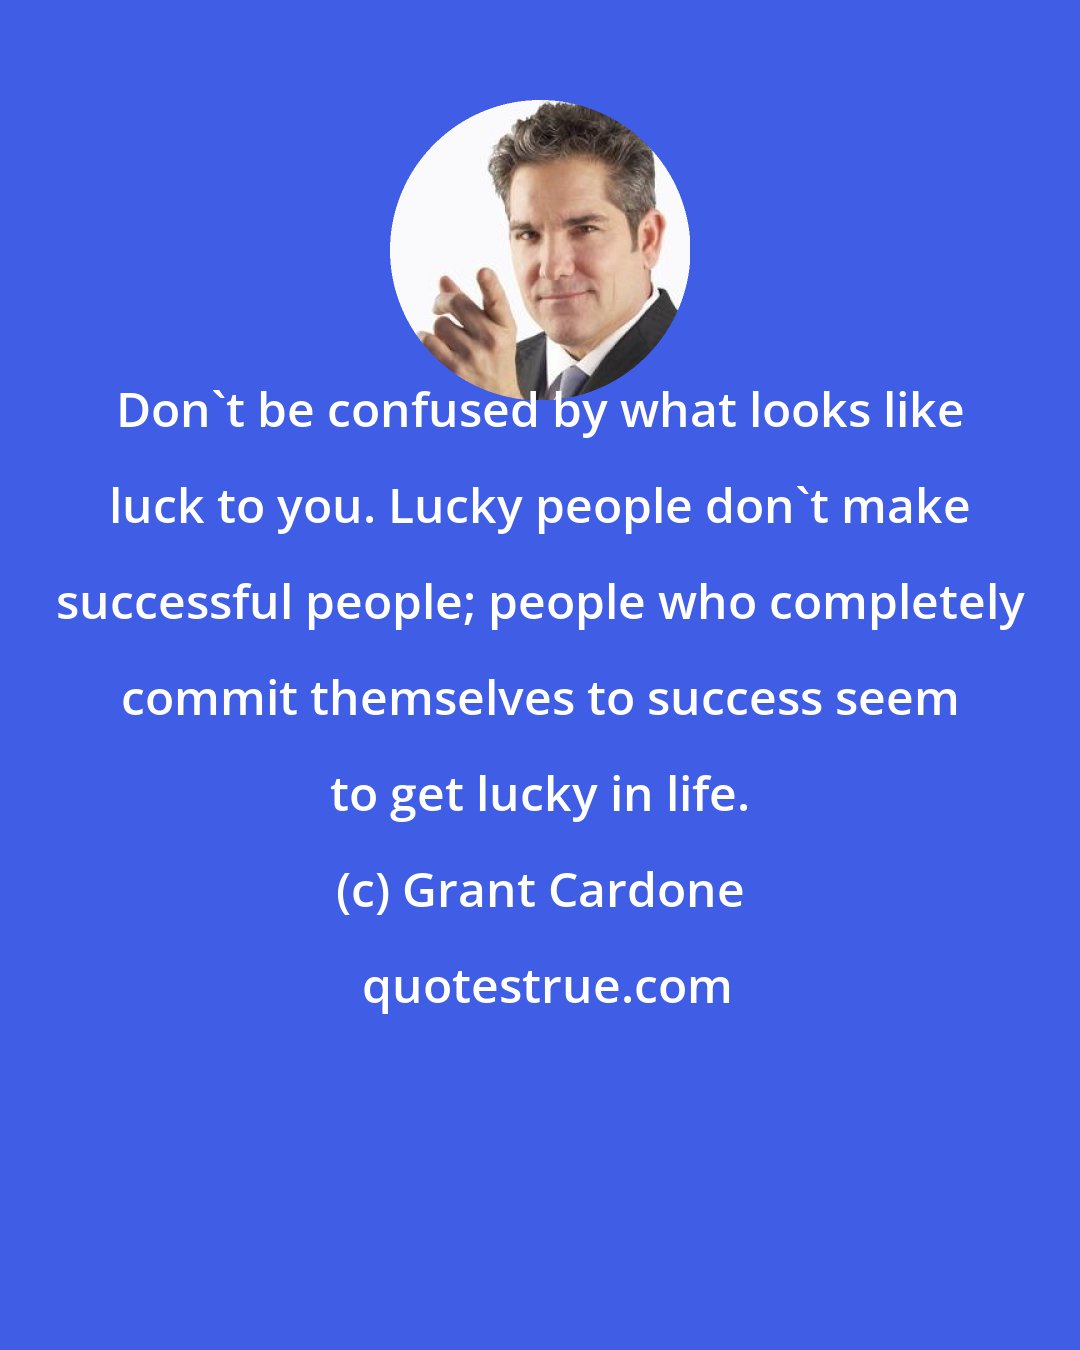 Grant Cardone: Don't be confused by what looks like luck to you. Lucky people don't make successful people; people who completely commit themselves to success seem to get lucky in life.